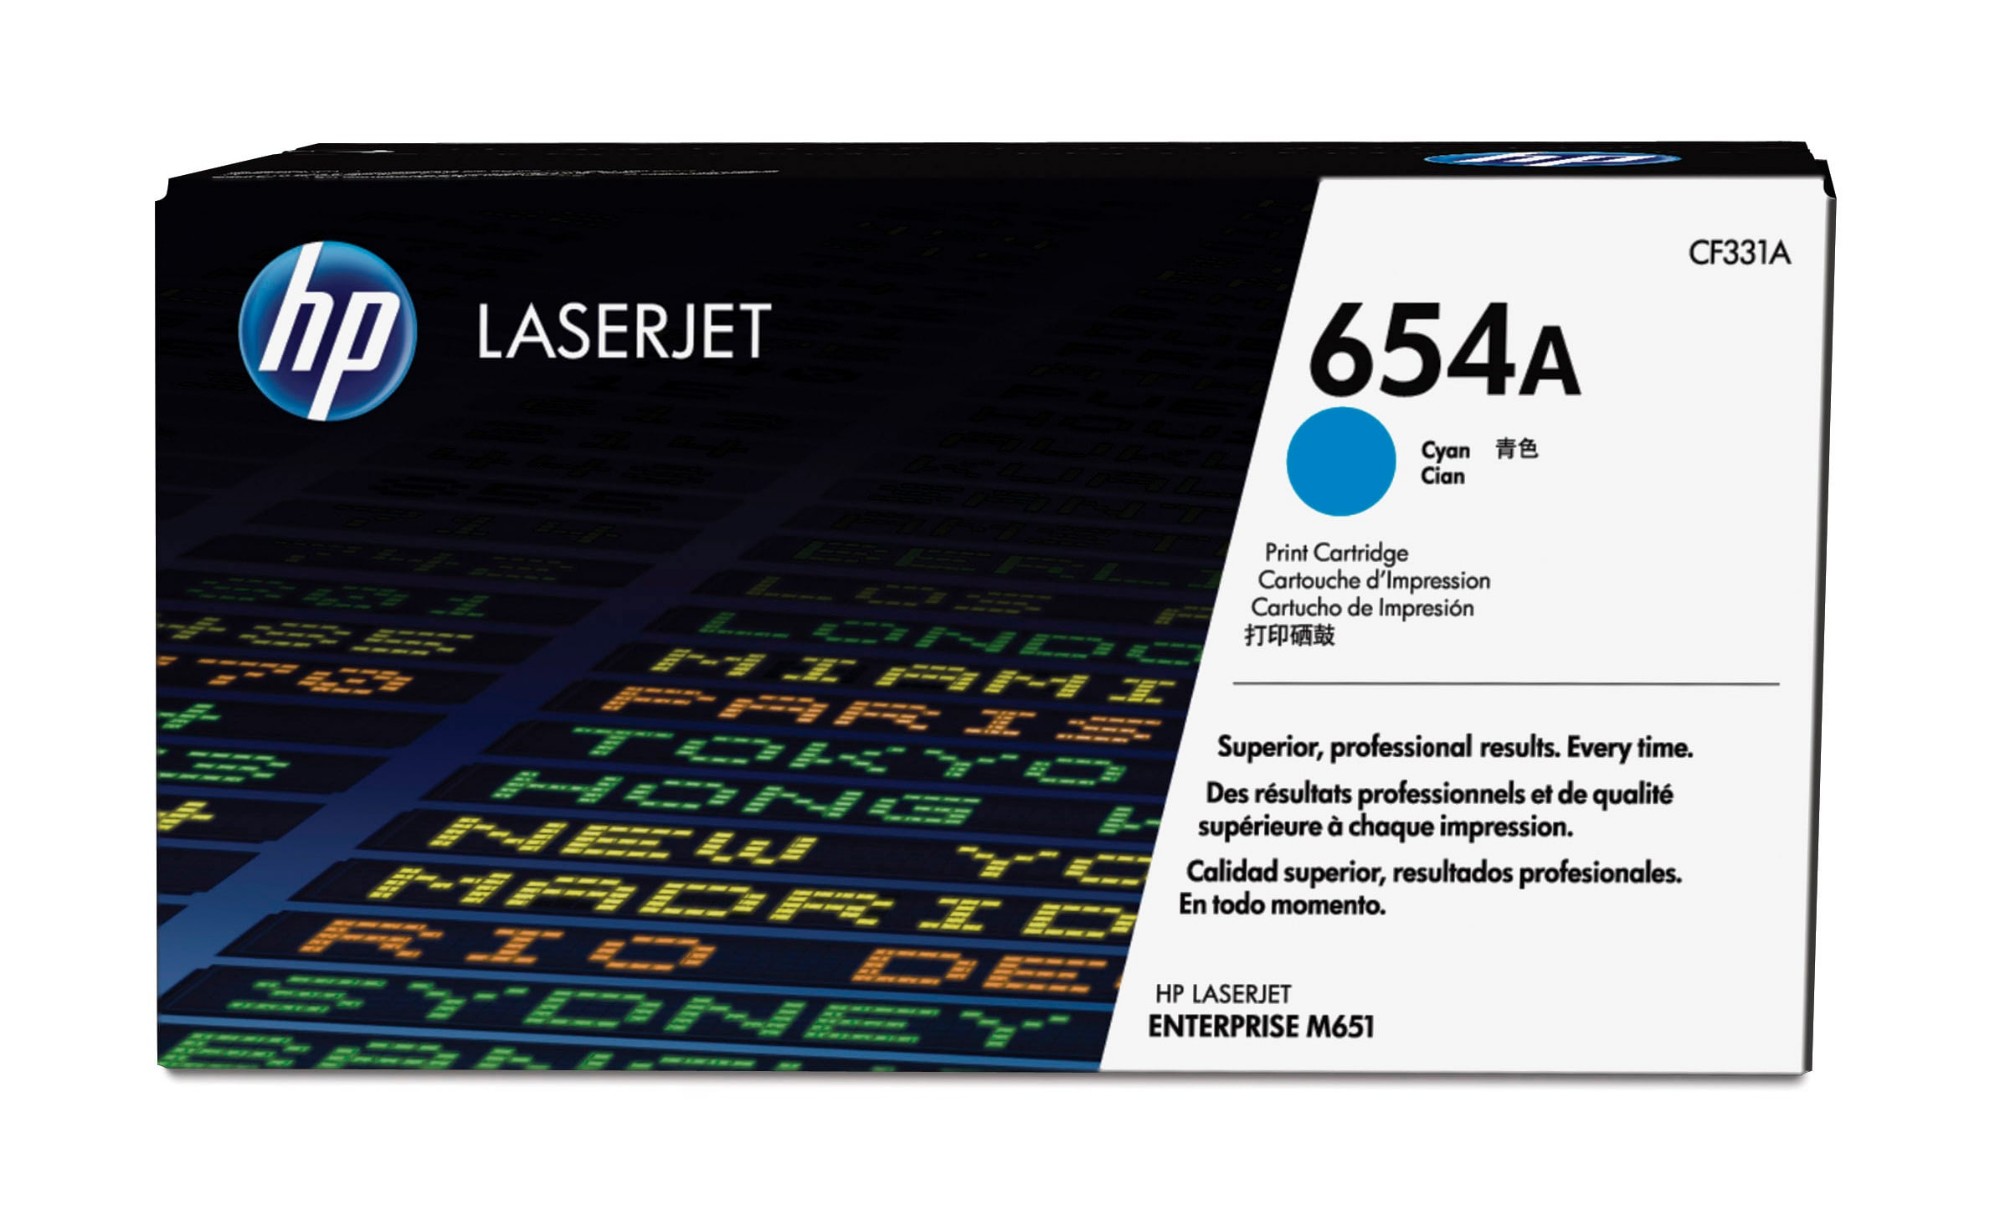 HP CF331A/654A Toner cartridge cyan, 15K pages ISO/IEC 19798 for HP Color LaserJet M 651